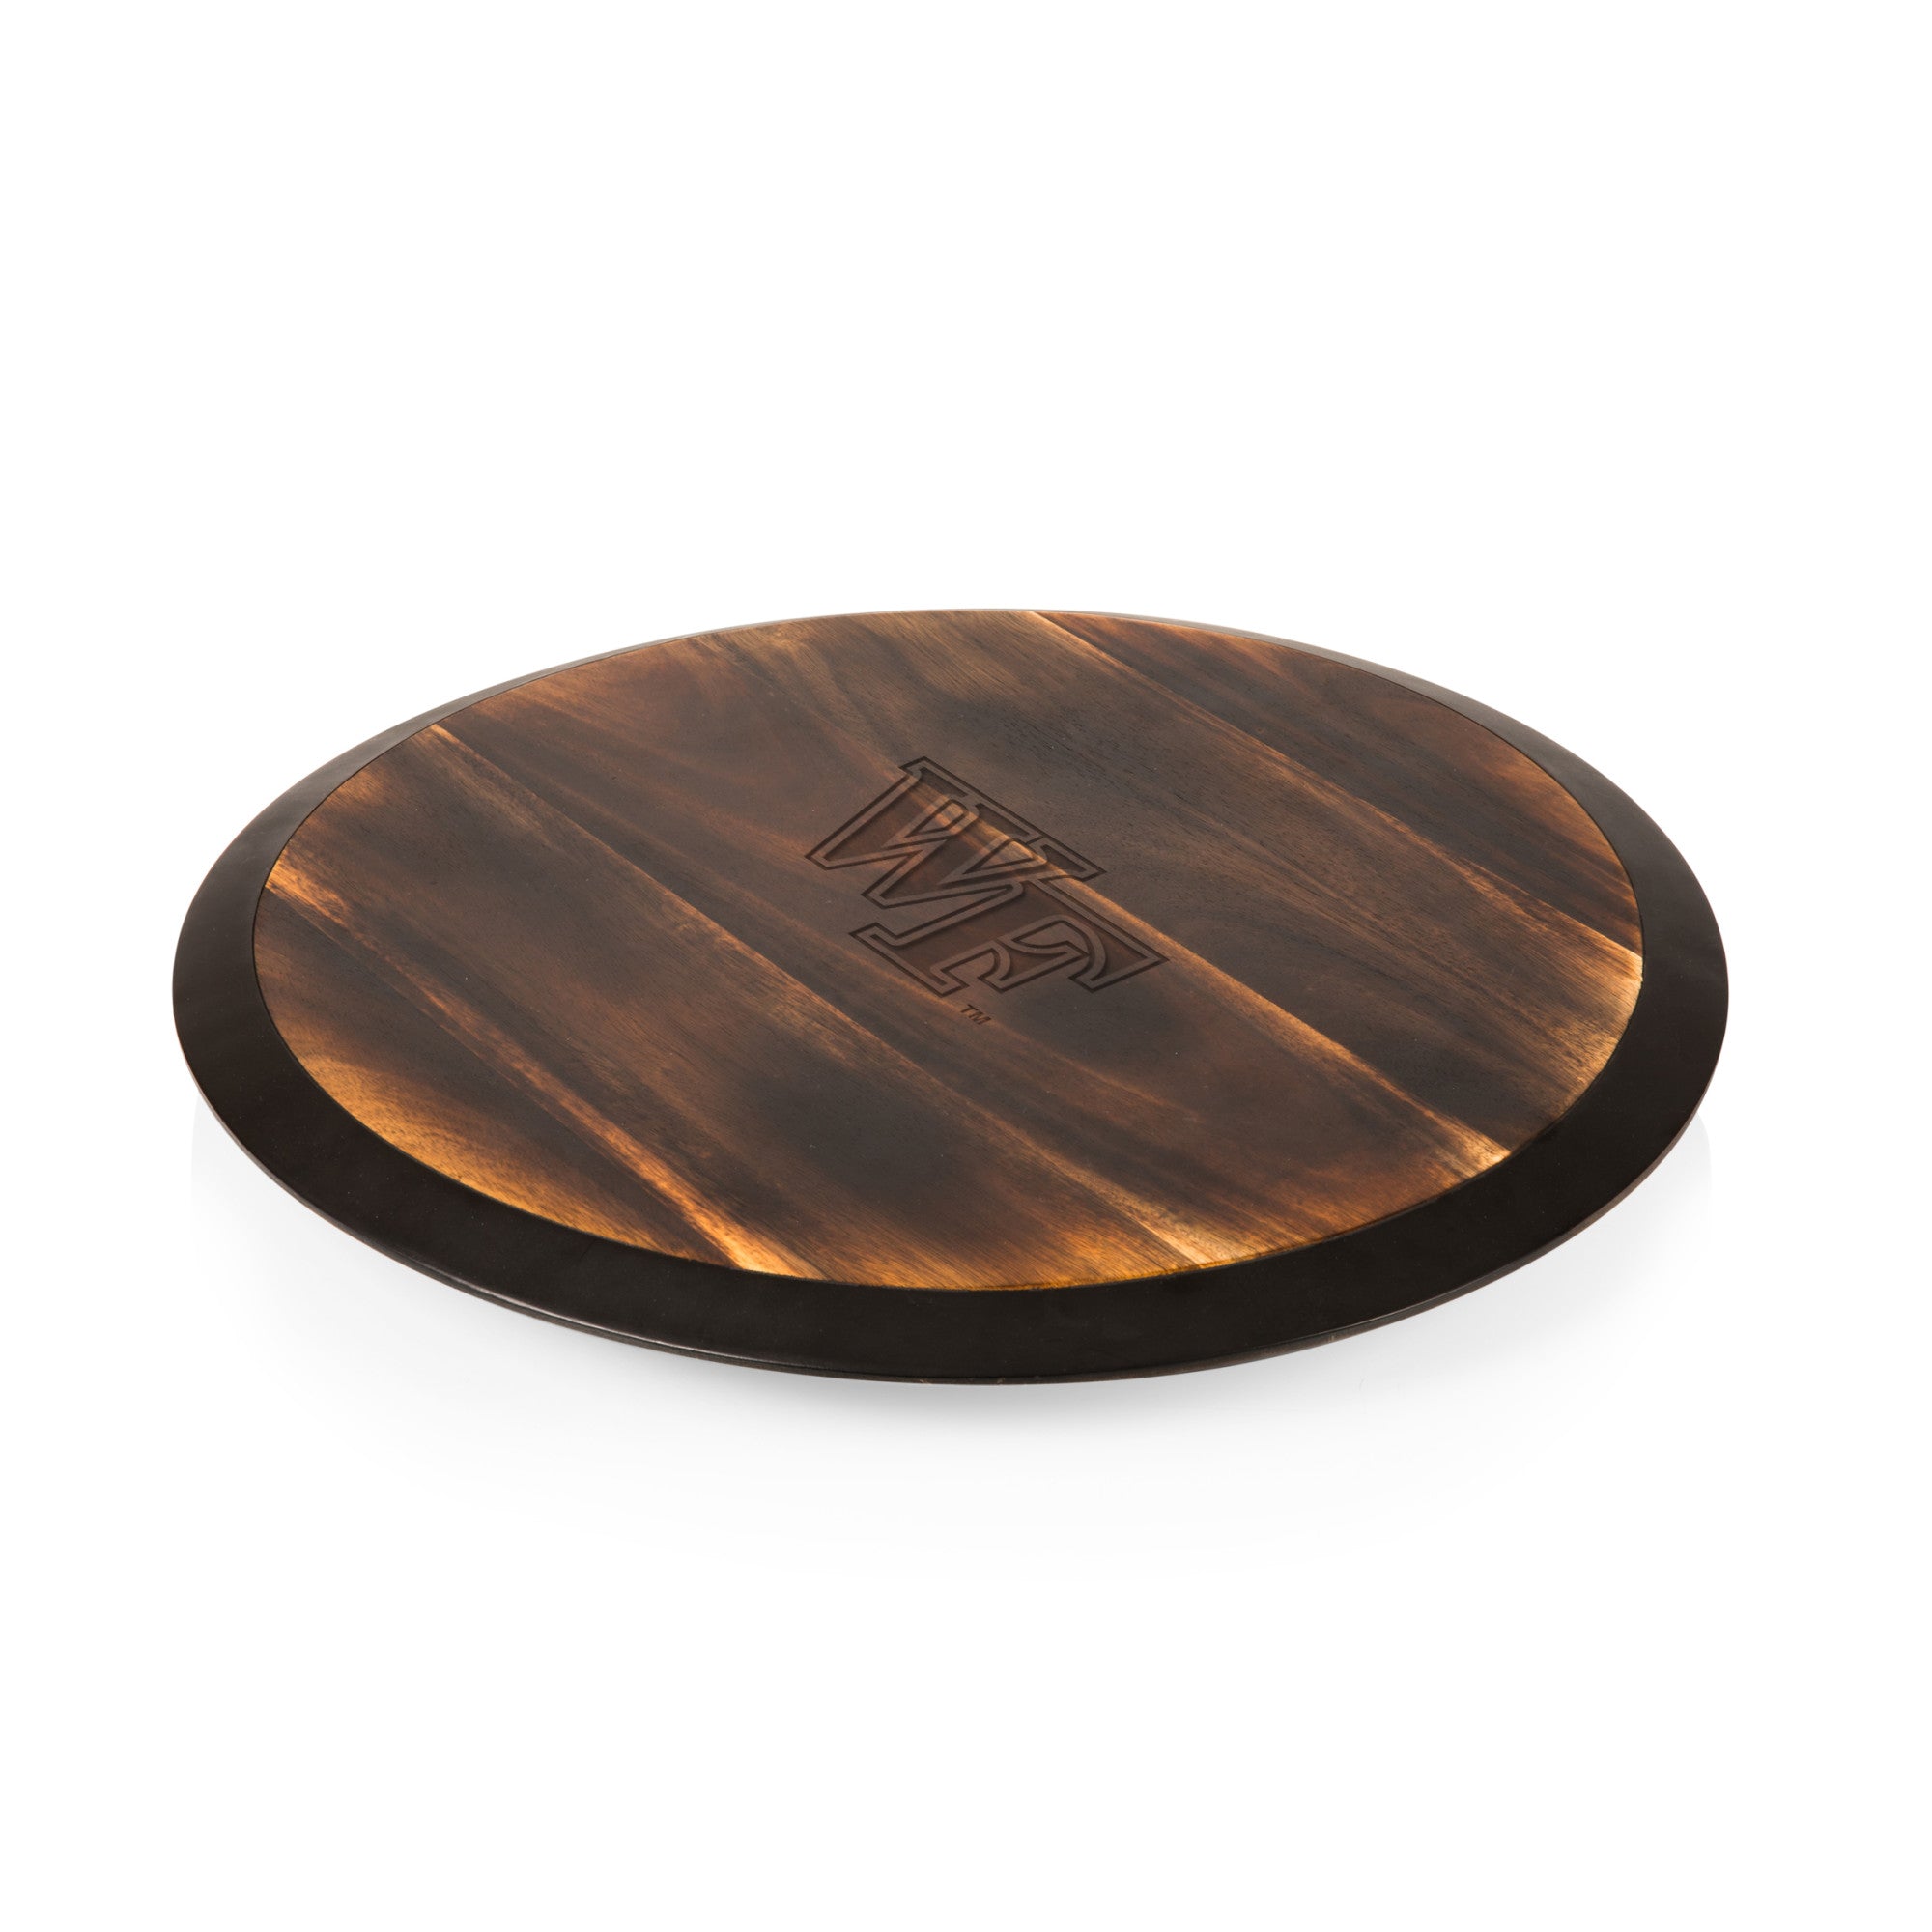 Wake Forest Demon Deacons - Lazy Susan Serving Tray, (Fire Acacia Wood)